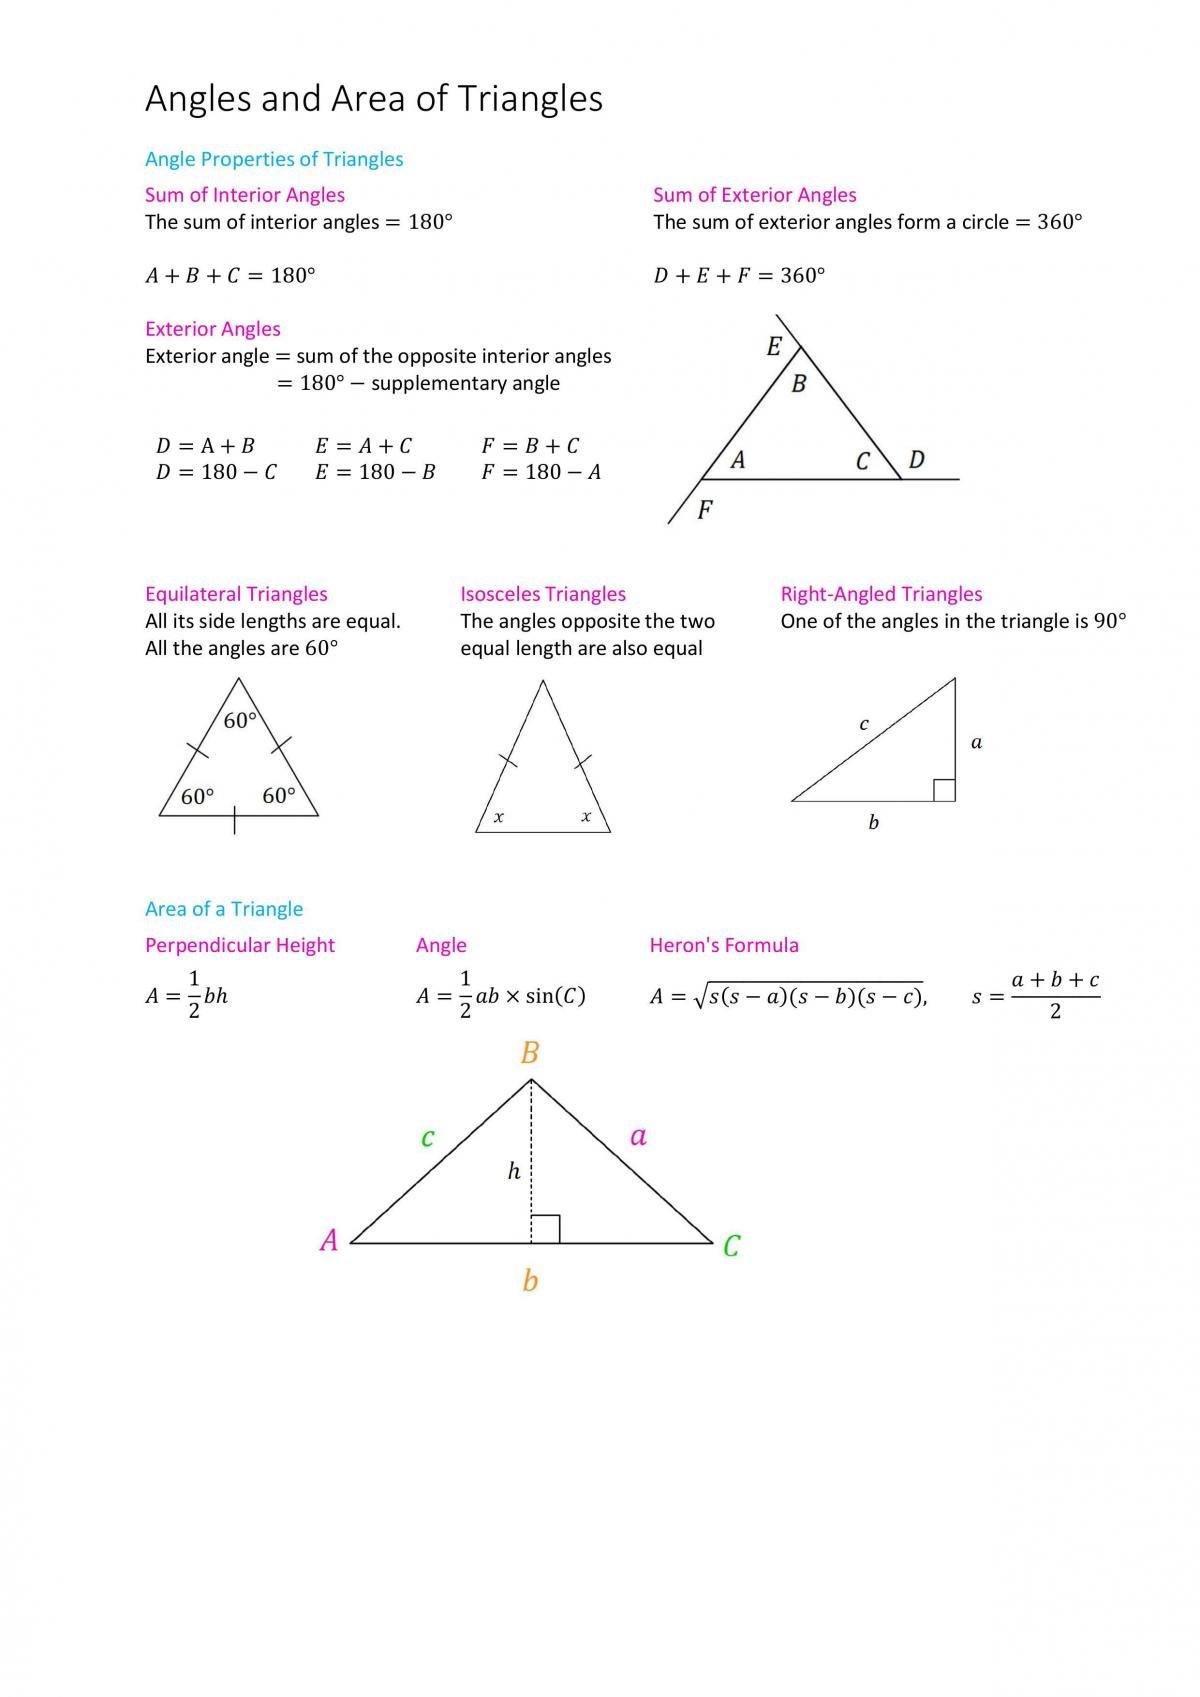 geometry - Convert a direction into an angle on our compass - Mathematics  Stack Exchange